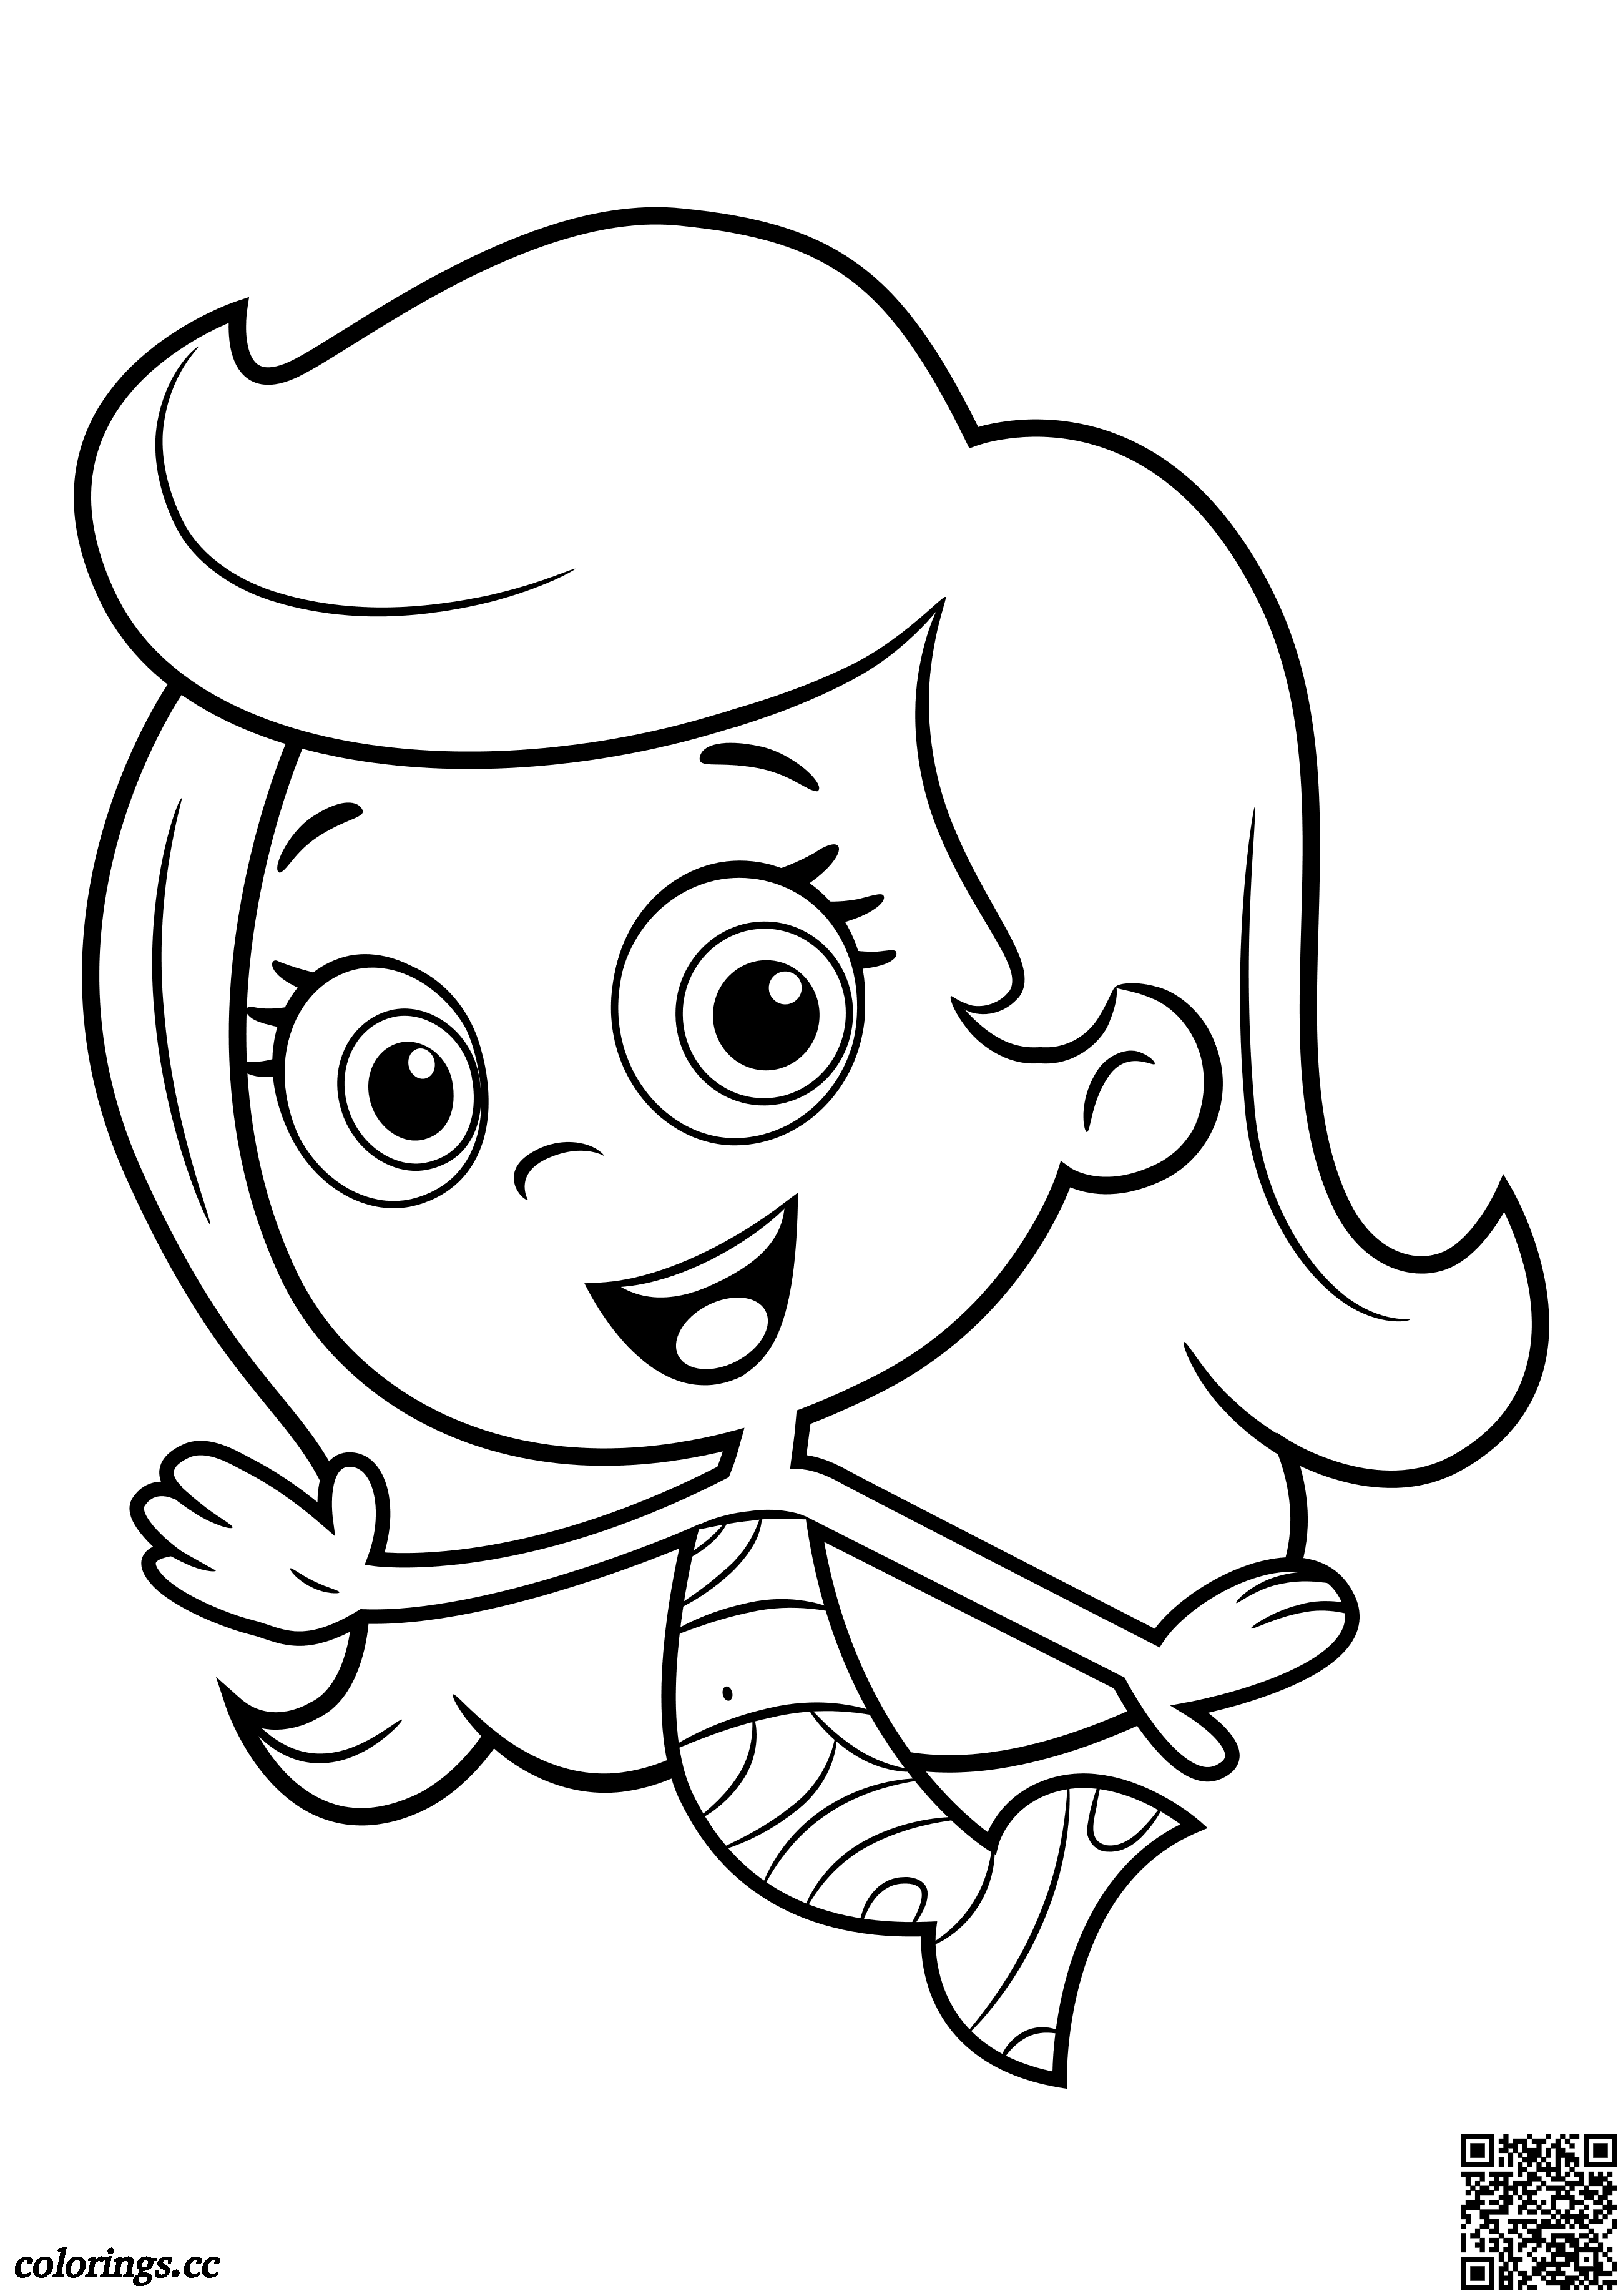 Molly coloring pages, Guppies and bubbles coloring pages - Colorings.cc